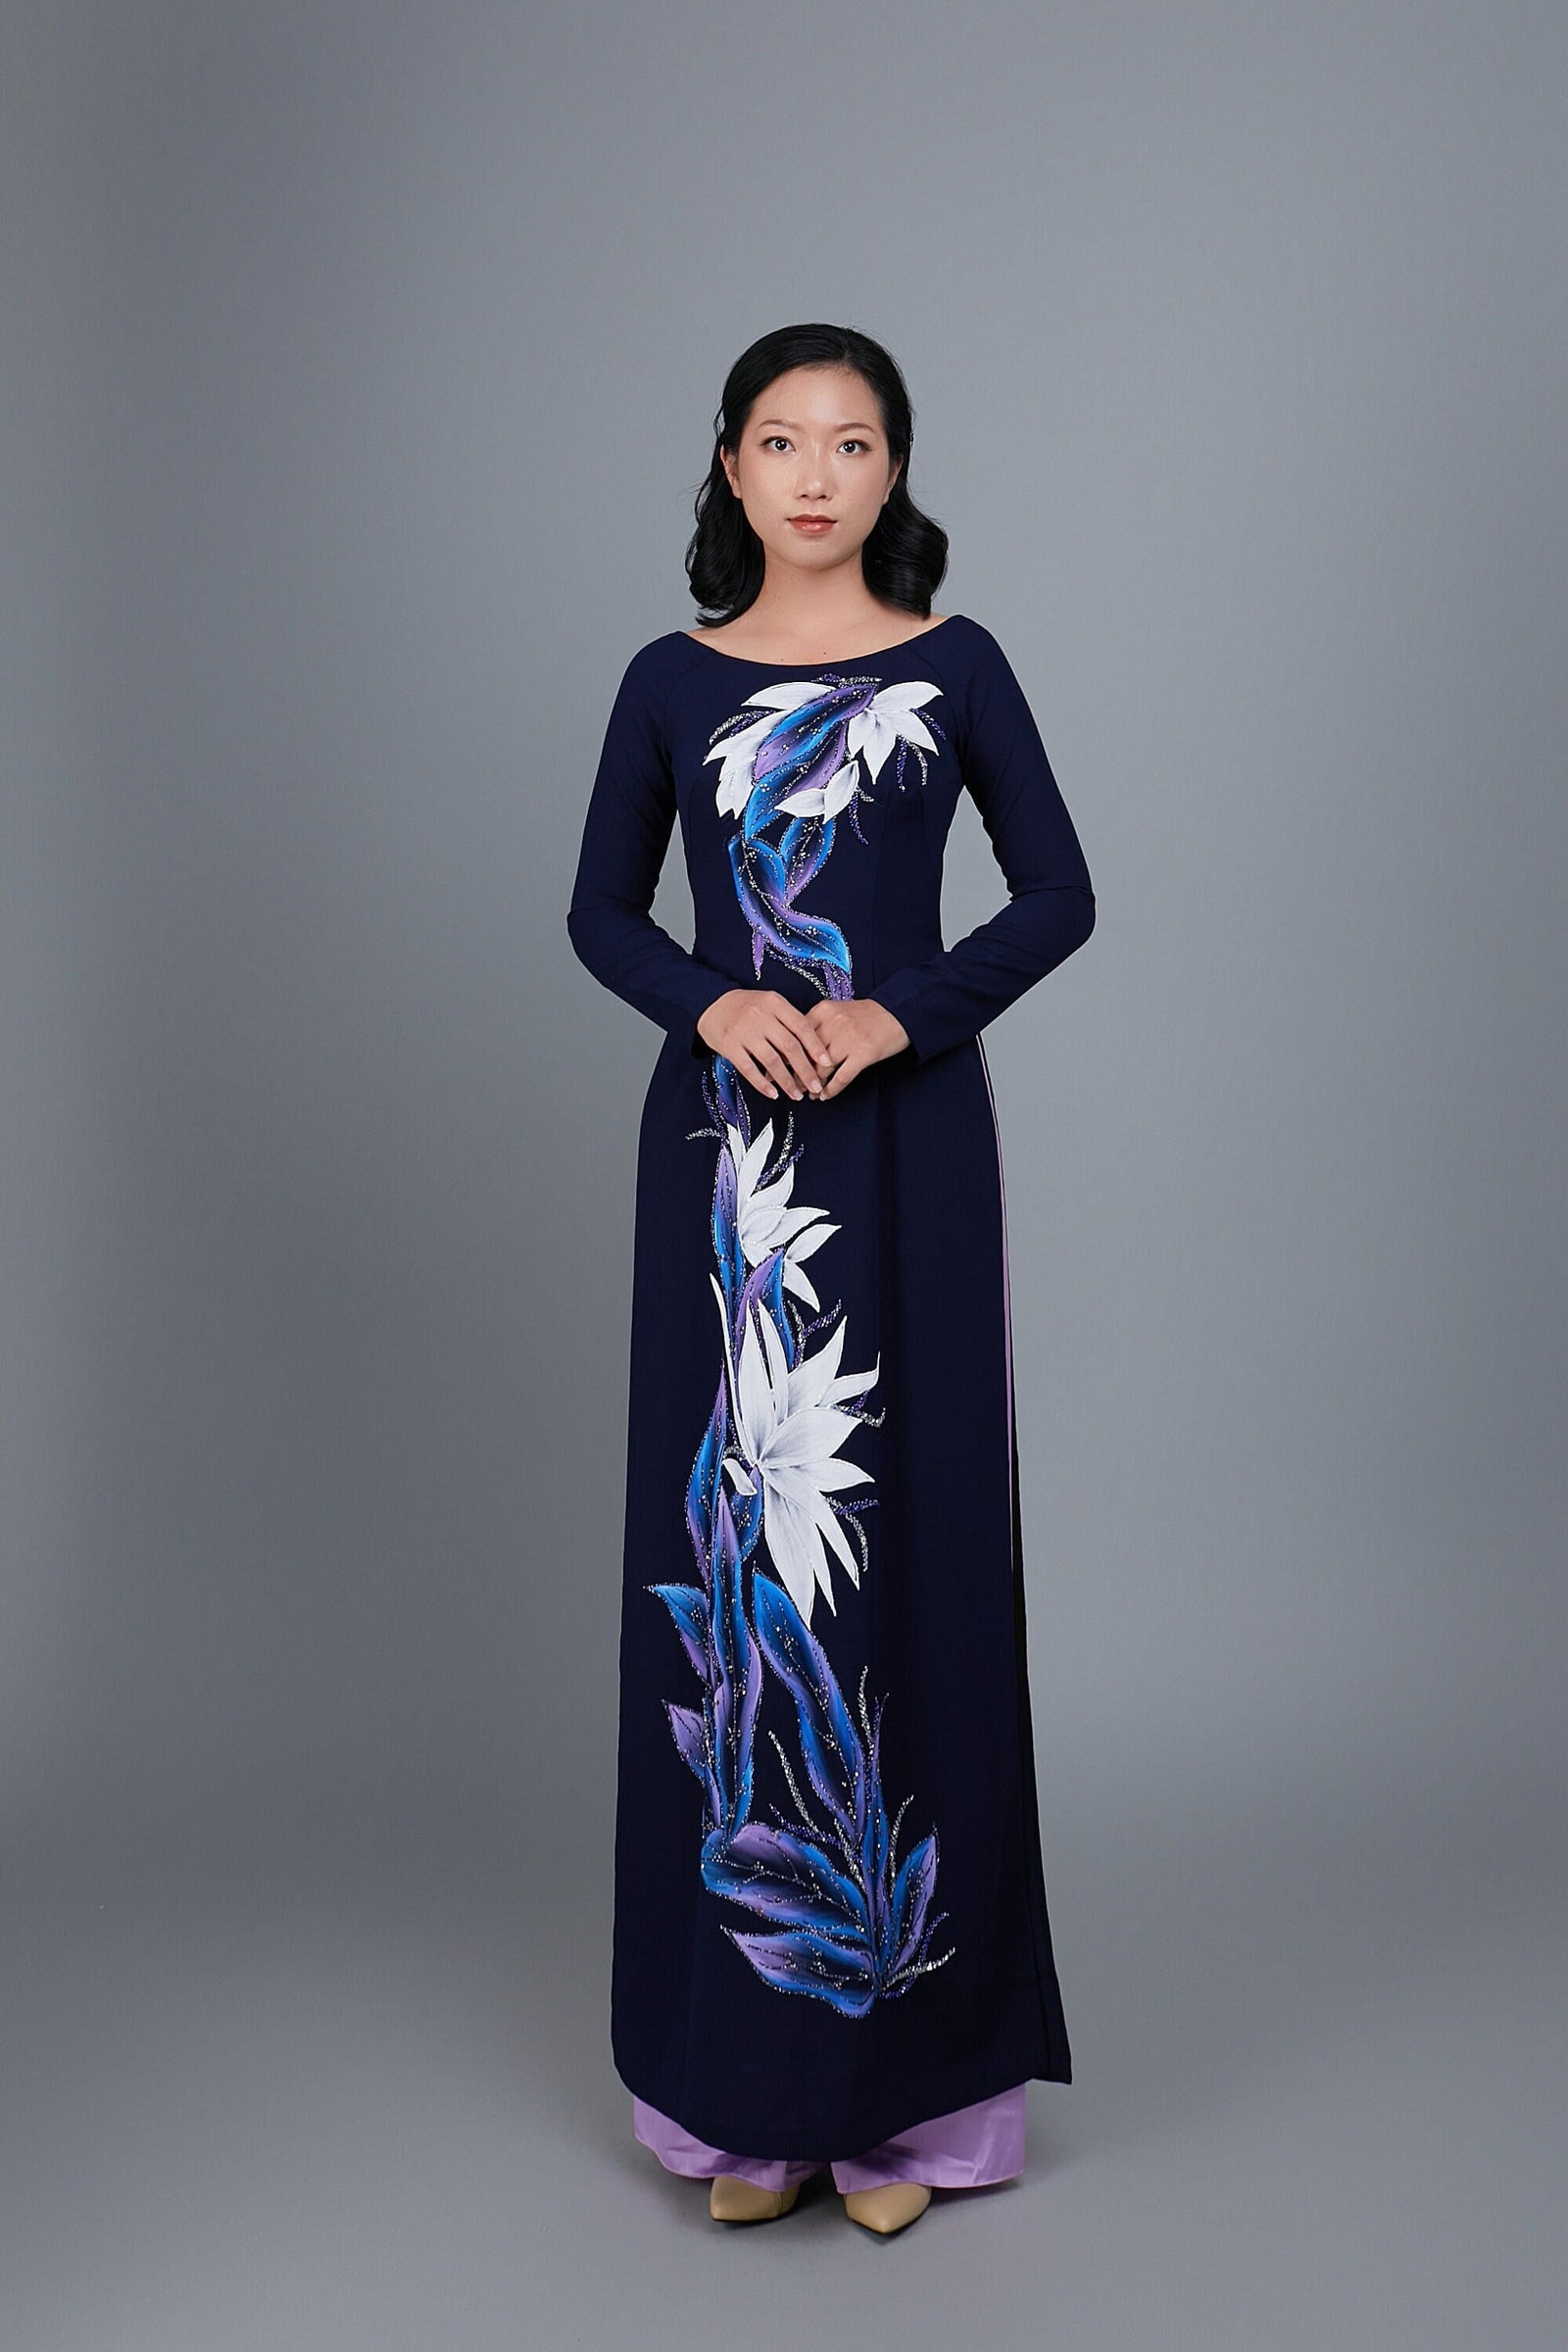 Custom made Vietnamese ao dai dress in red with embroidered, peacock m -  Mark&Vy Ao Dai